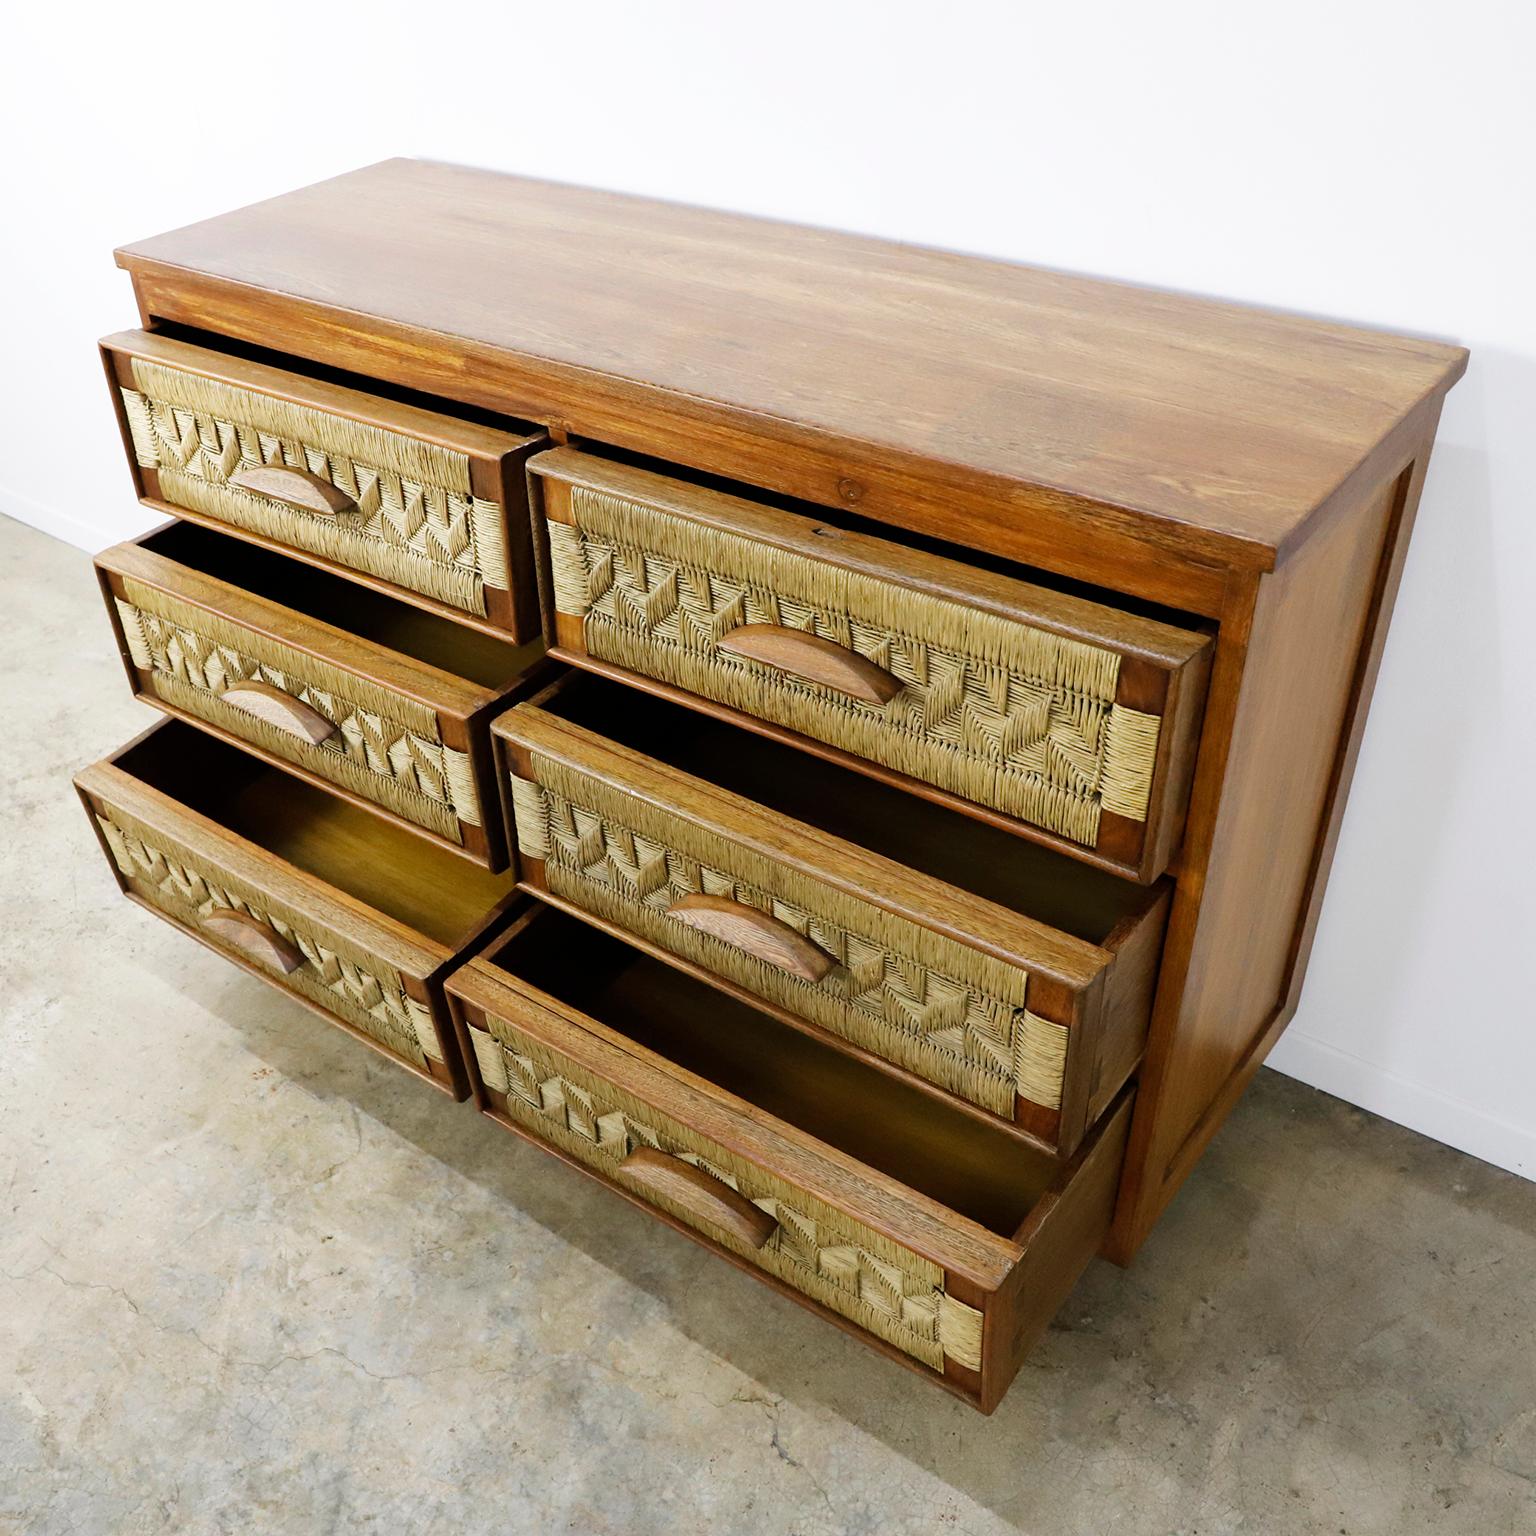 We offer this midcentury Drawer in the style of Clara Porset made in premium solid mahogany wood and palm cords, circa 1960. Excellent vintage condition, palm is all original and the mahogany case has been professionally refinished. A fantastic